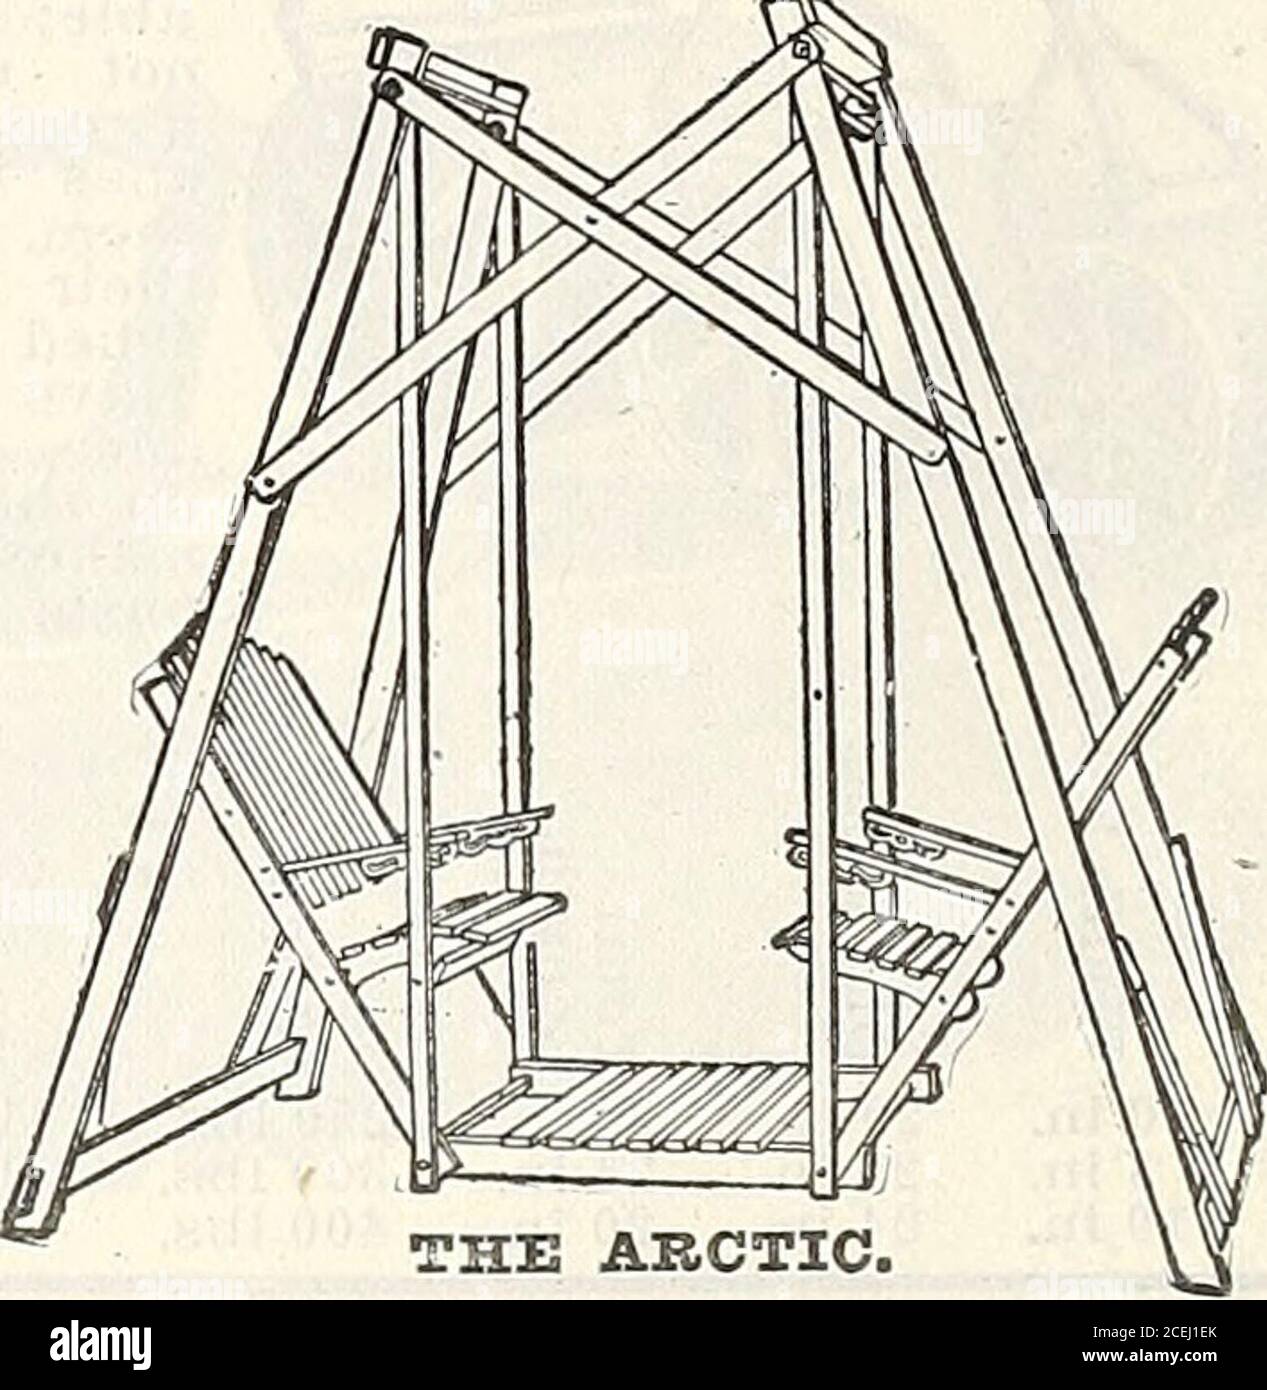 https://c8.alamy.com/comp/2CEJ1EK/1916-griffith-and-turner-co-farm-and-garden-supplies-lawn-swings-new-and-original-idea-cutting-down-the-high-derrick-swingto-meet-the-demand-of-the-small-children-and-cater-to-theirdelight-and-welfare-the-most-useful-article-for-the-enter-tainment-of-the-children-can-be-used-in-the-nursery-parloron-the-porch-oi-lawn-useful-all-the-year-around-frame-ispainted-bright-vermilion-chairs-and-hangers-golden-oak-finishfloor-space-4-feet-11-inches-by-3-feet-4-inches-our-speciallist-price-price2-passenger-500-325-ozone-steei-lawn-swing-made-of-35-carbon-steel-throughout-except-2CEJ1EK.jpg